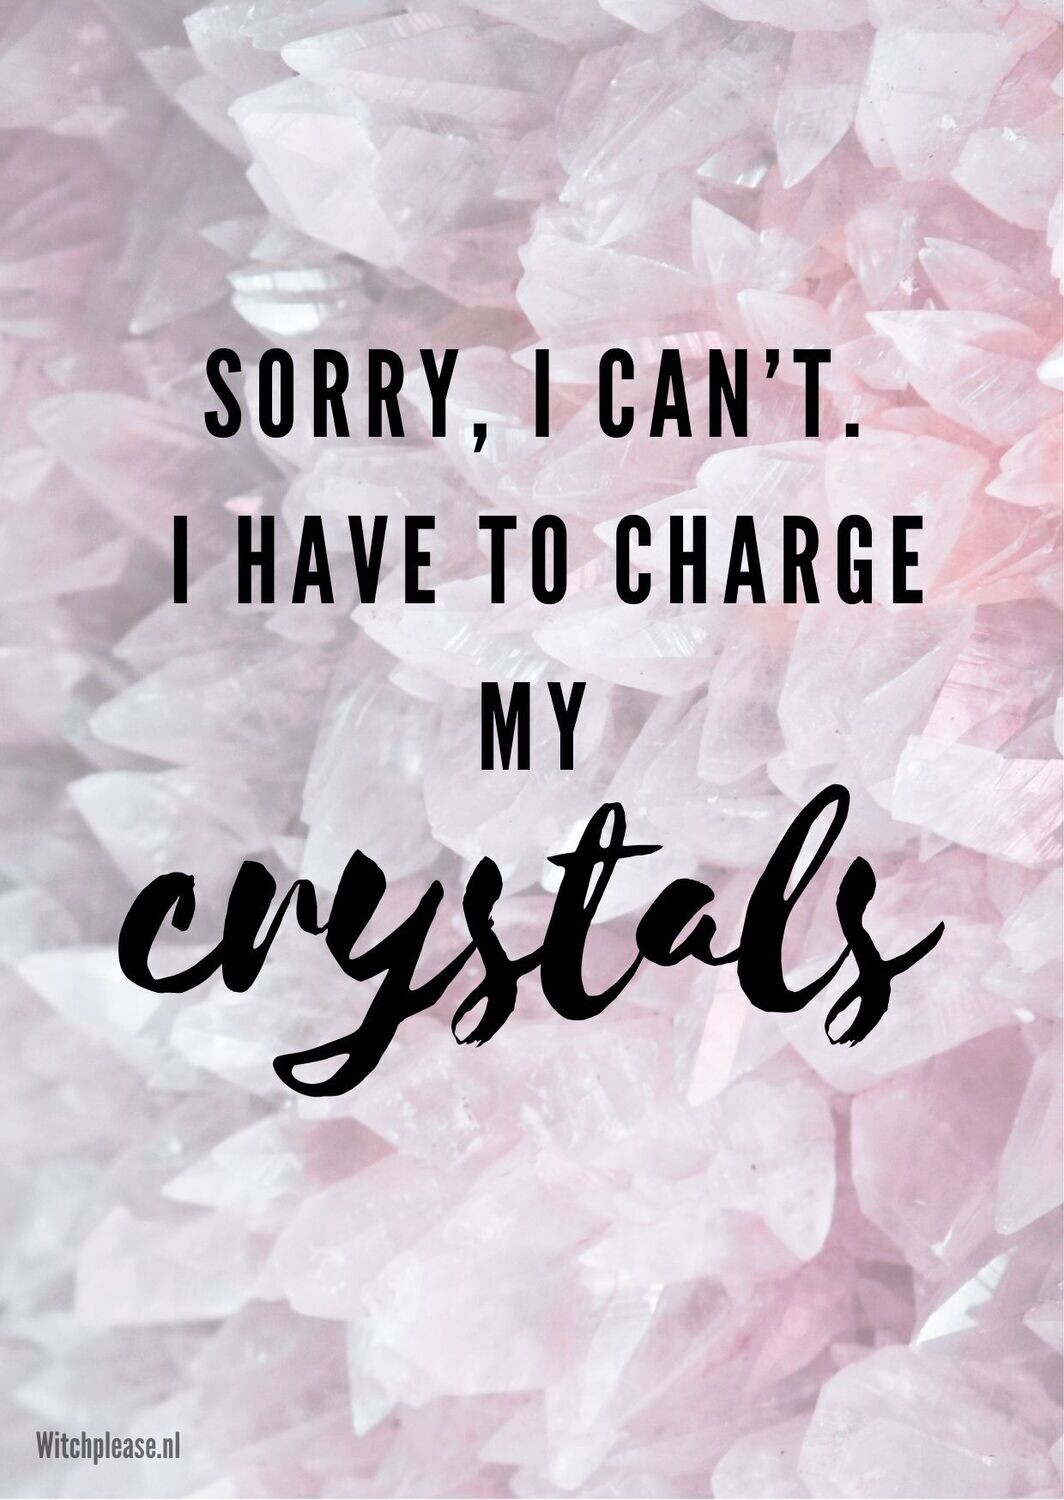 Ansichtkaart Charge My Crystals